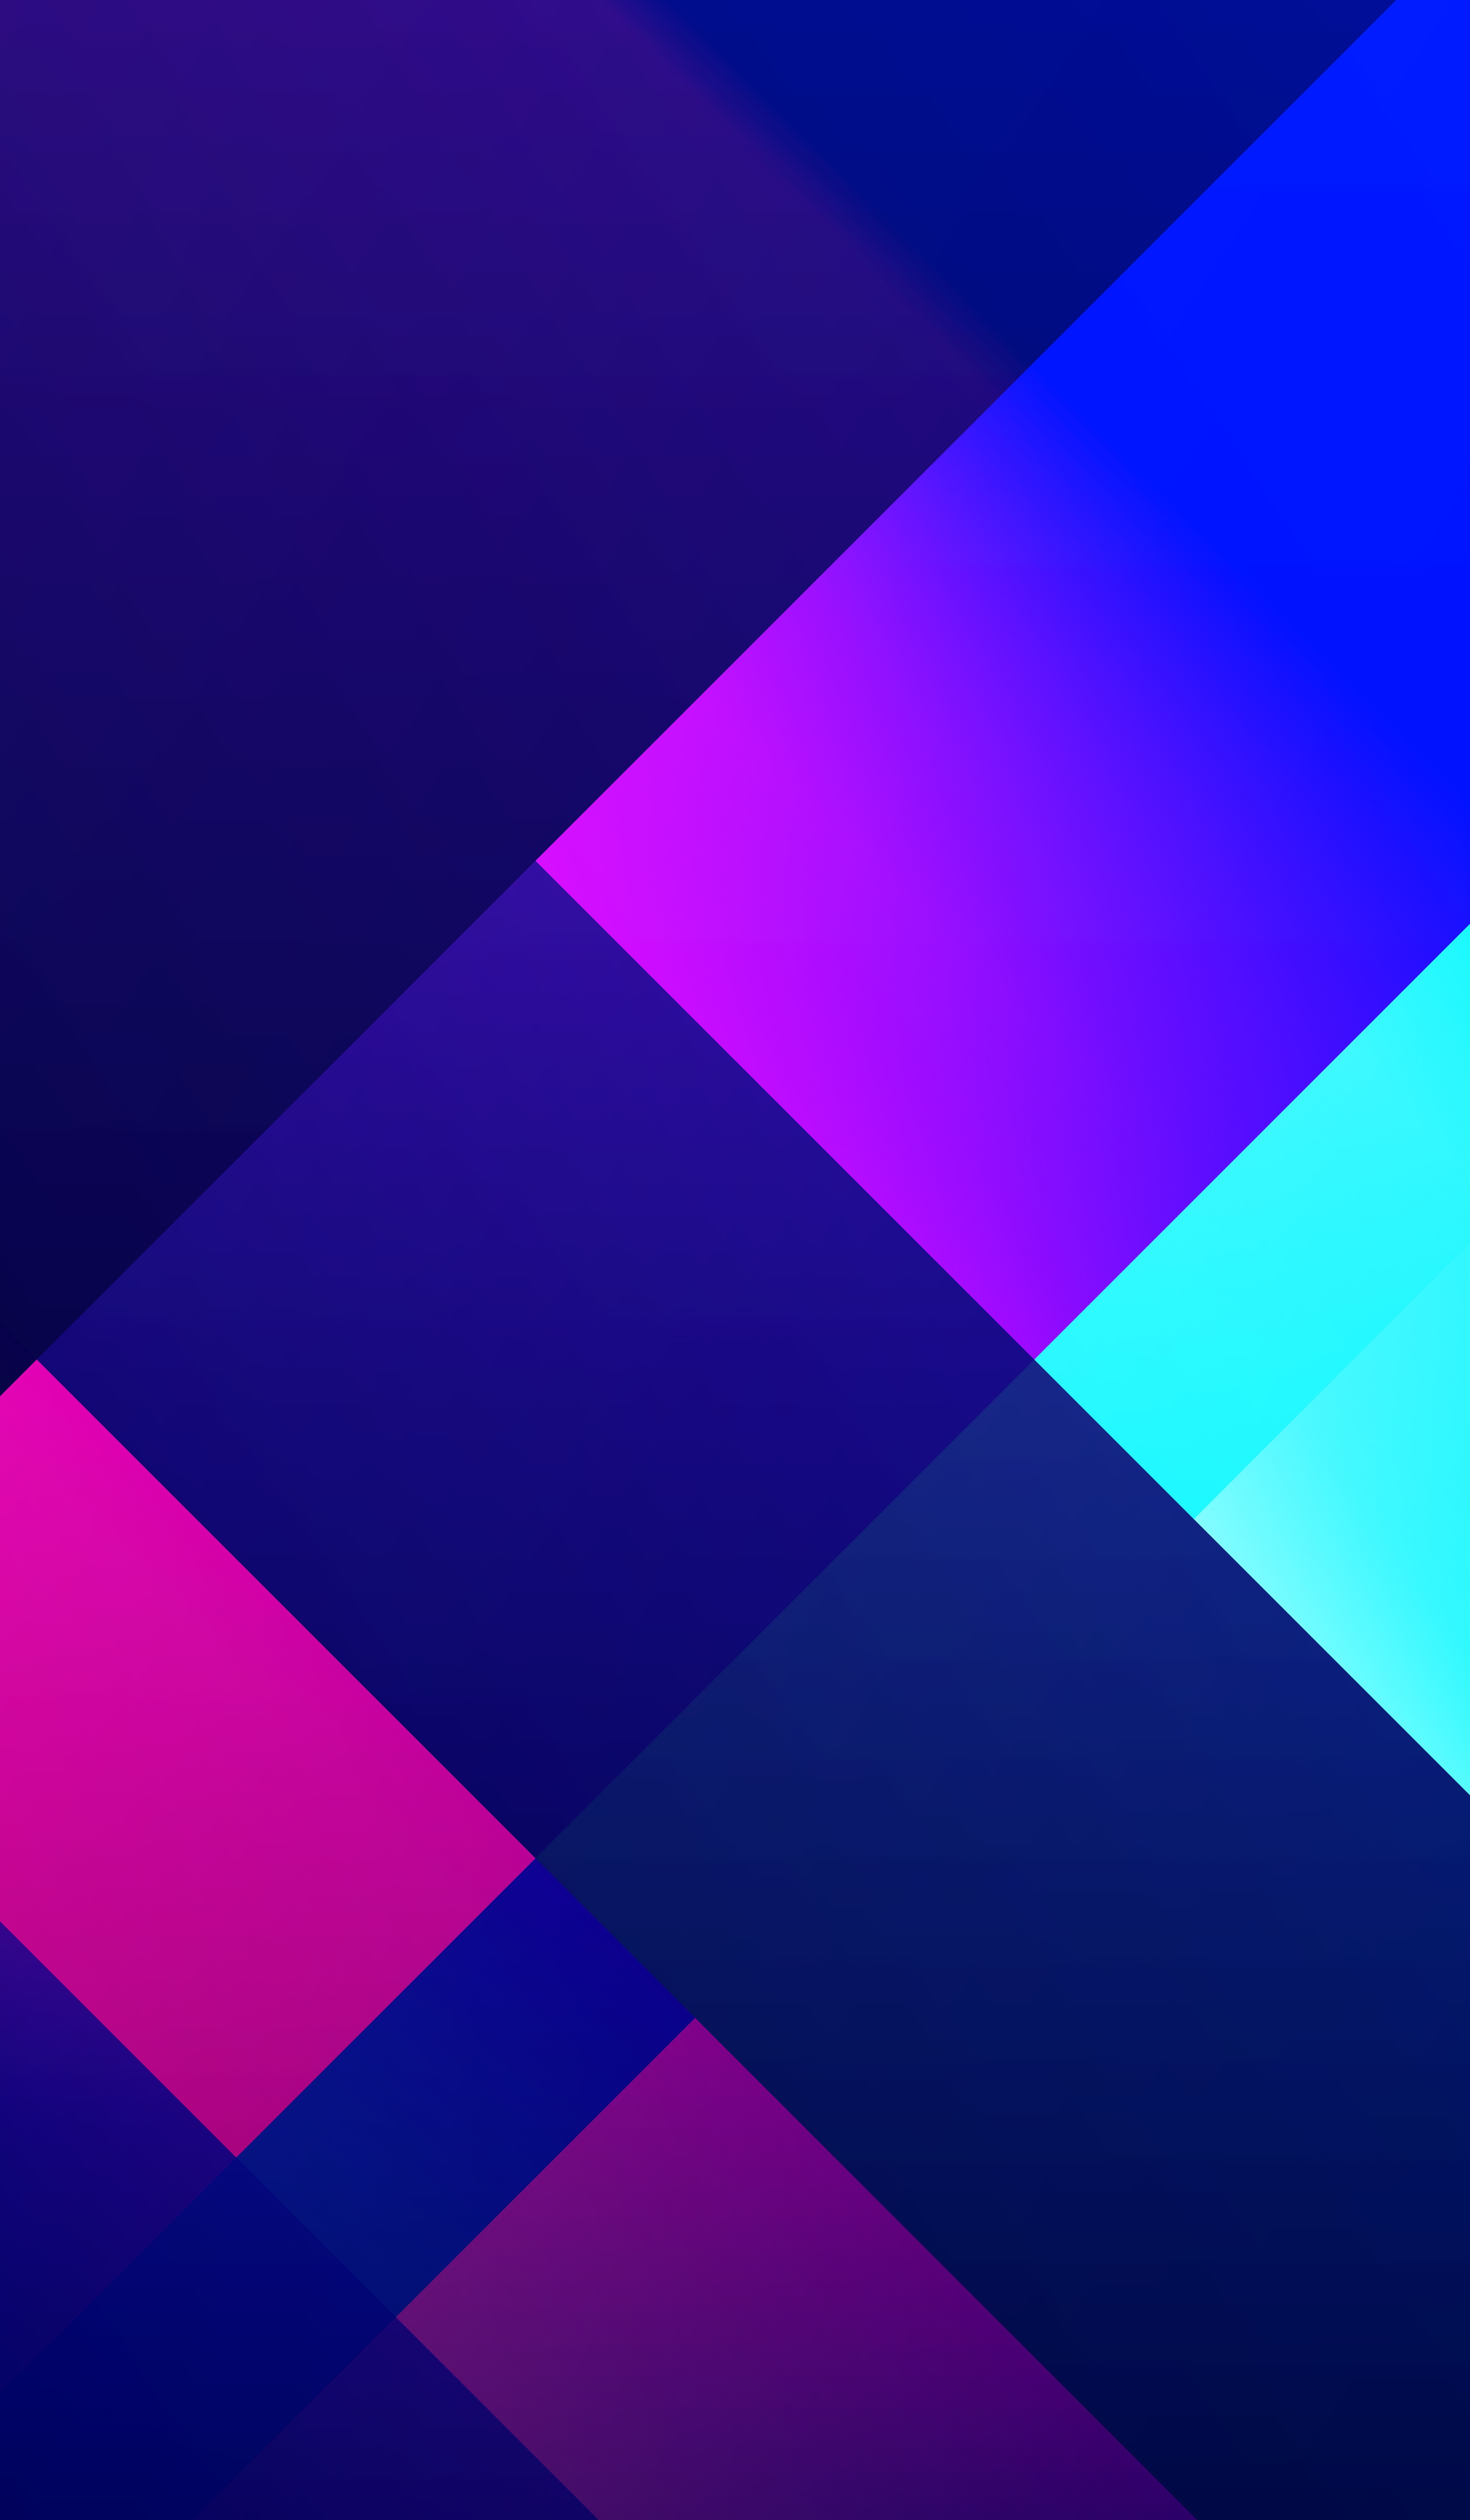 motley, geometry, gradient, abstract, multicolored QHD